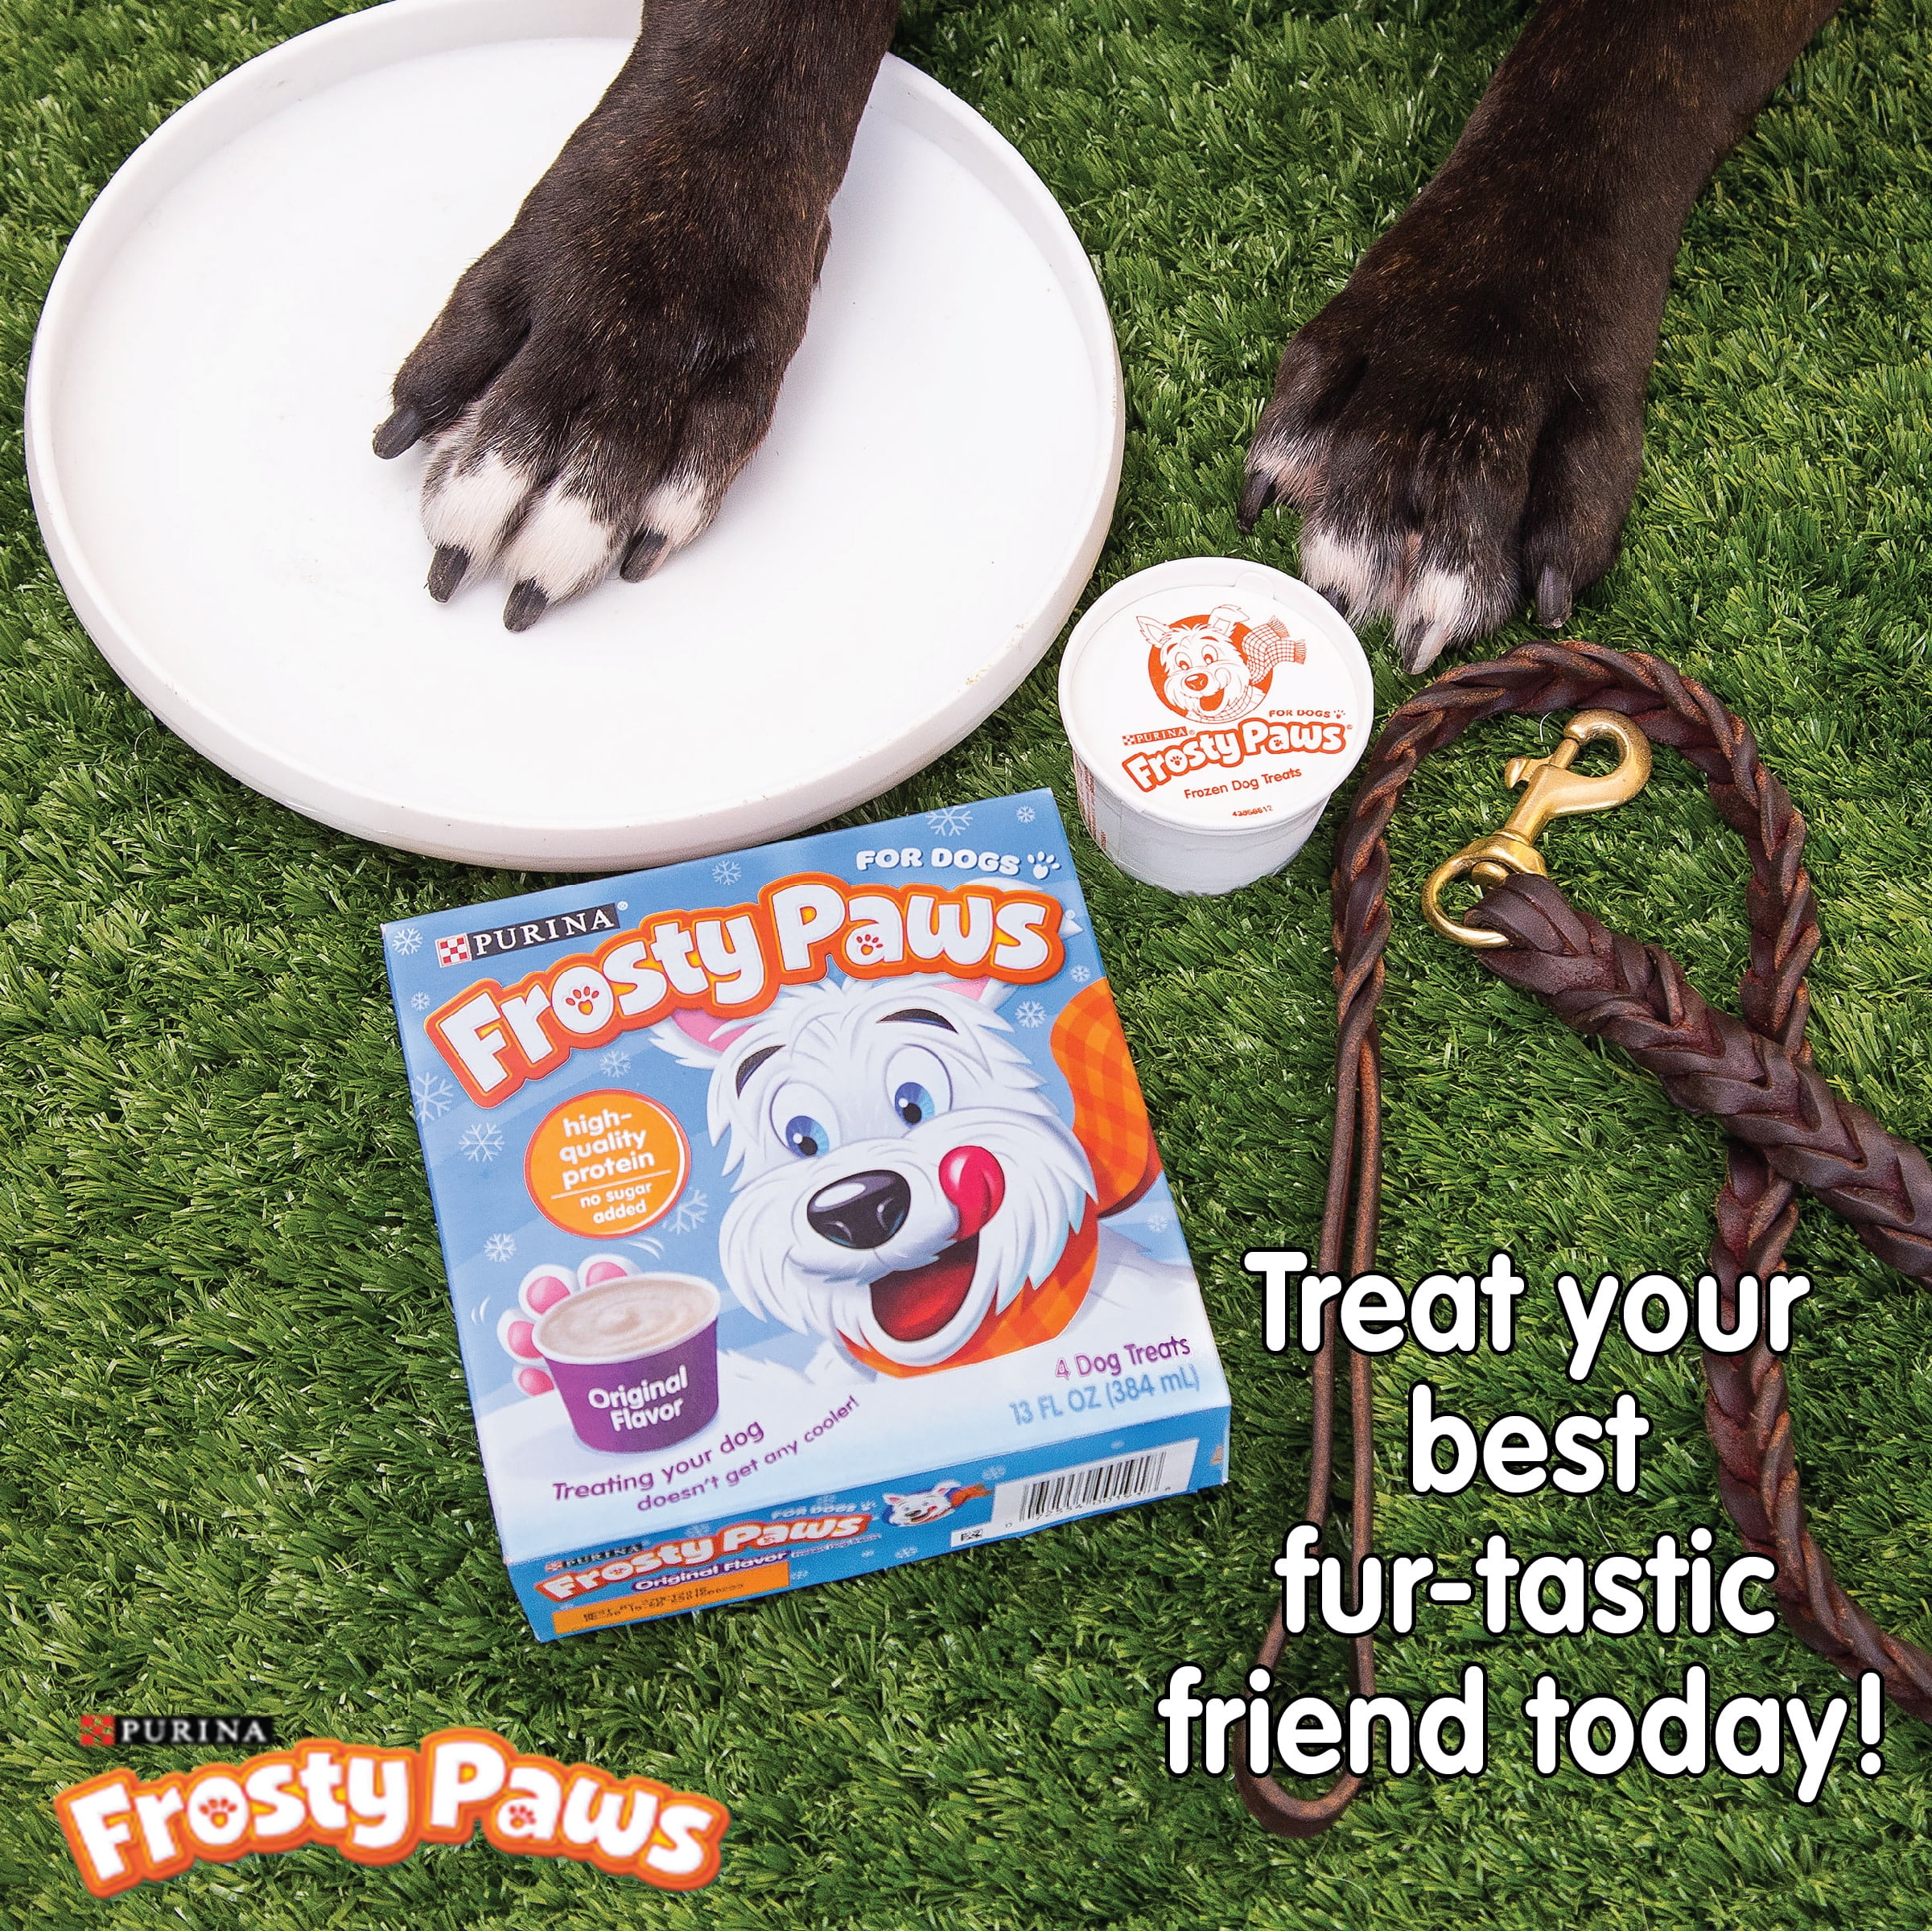 Purina Frosty Paws Peanut Butter Flavor Frozen Dog Treats, Count 